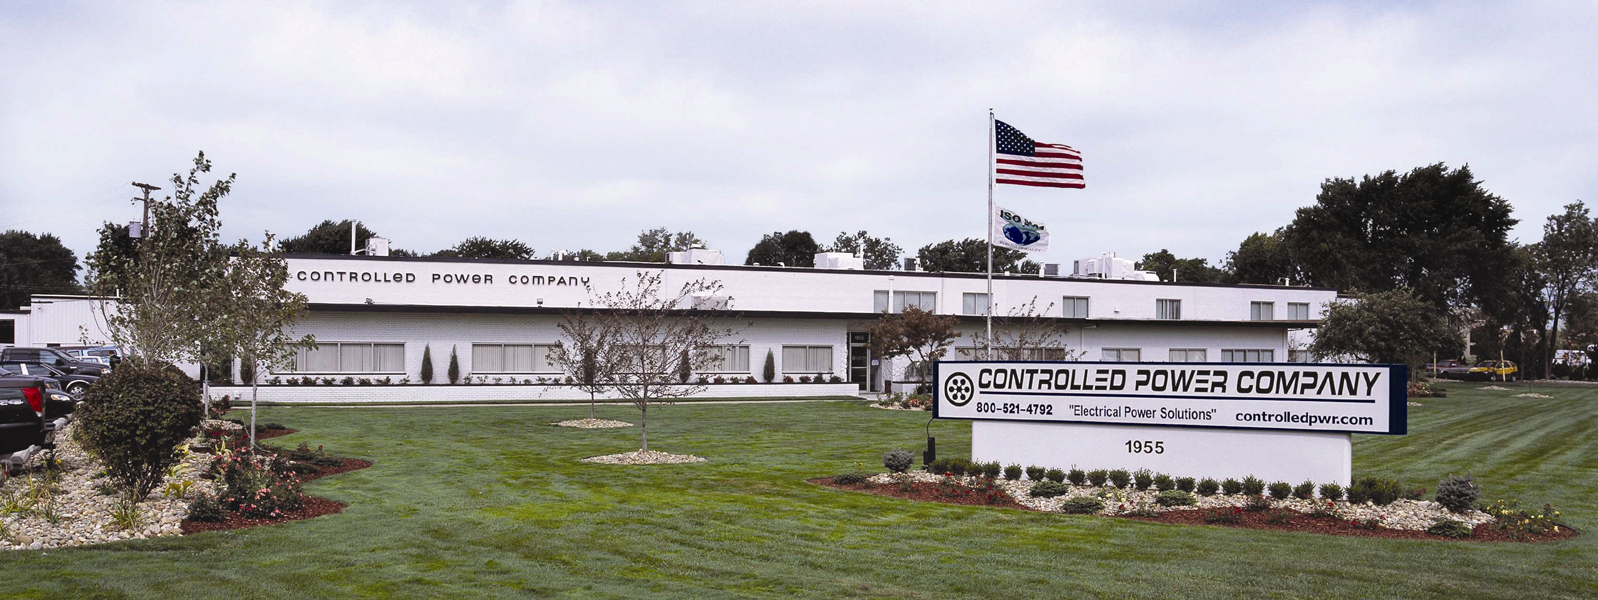 Controlled Power Company Facility Headquarters